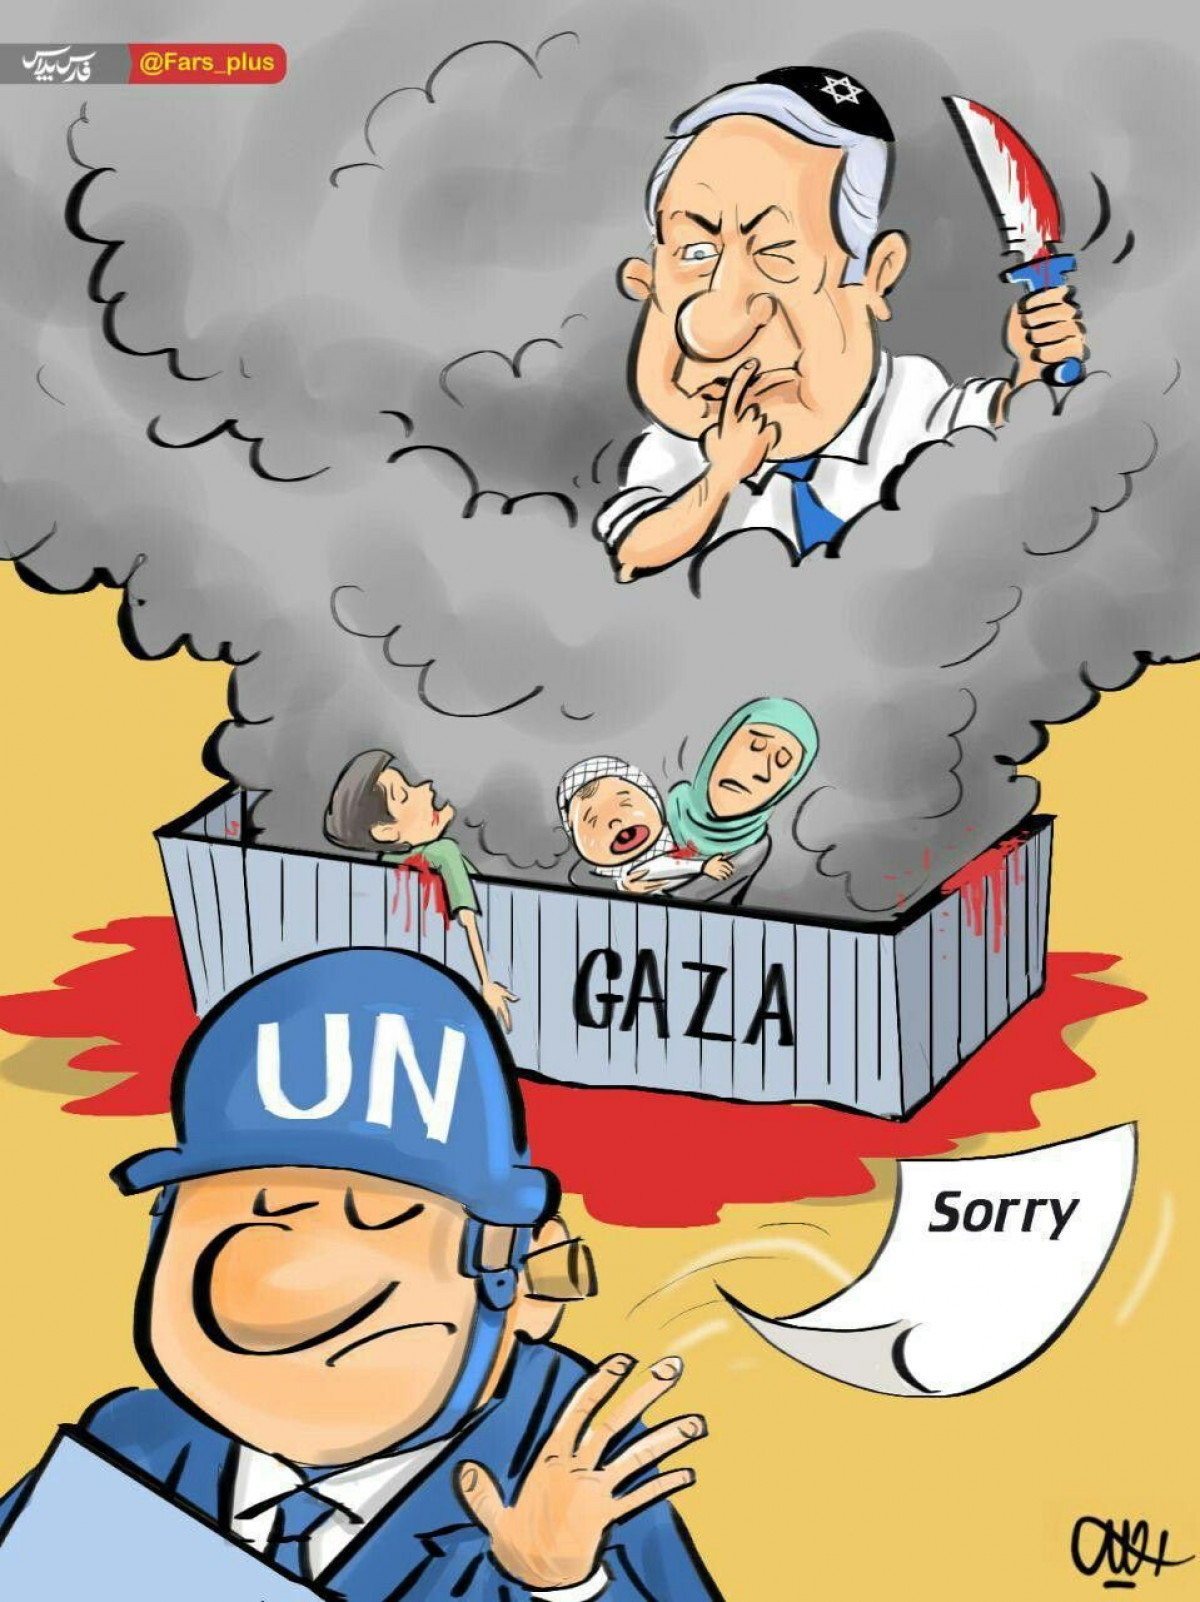 THE SILENCE OF THE UNITED NATIONS AGAINST THE KILLING OF THE OPPRESSED PEOPLE OF GAZA